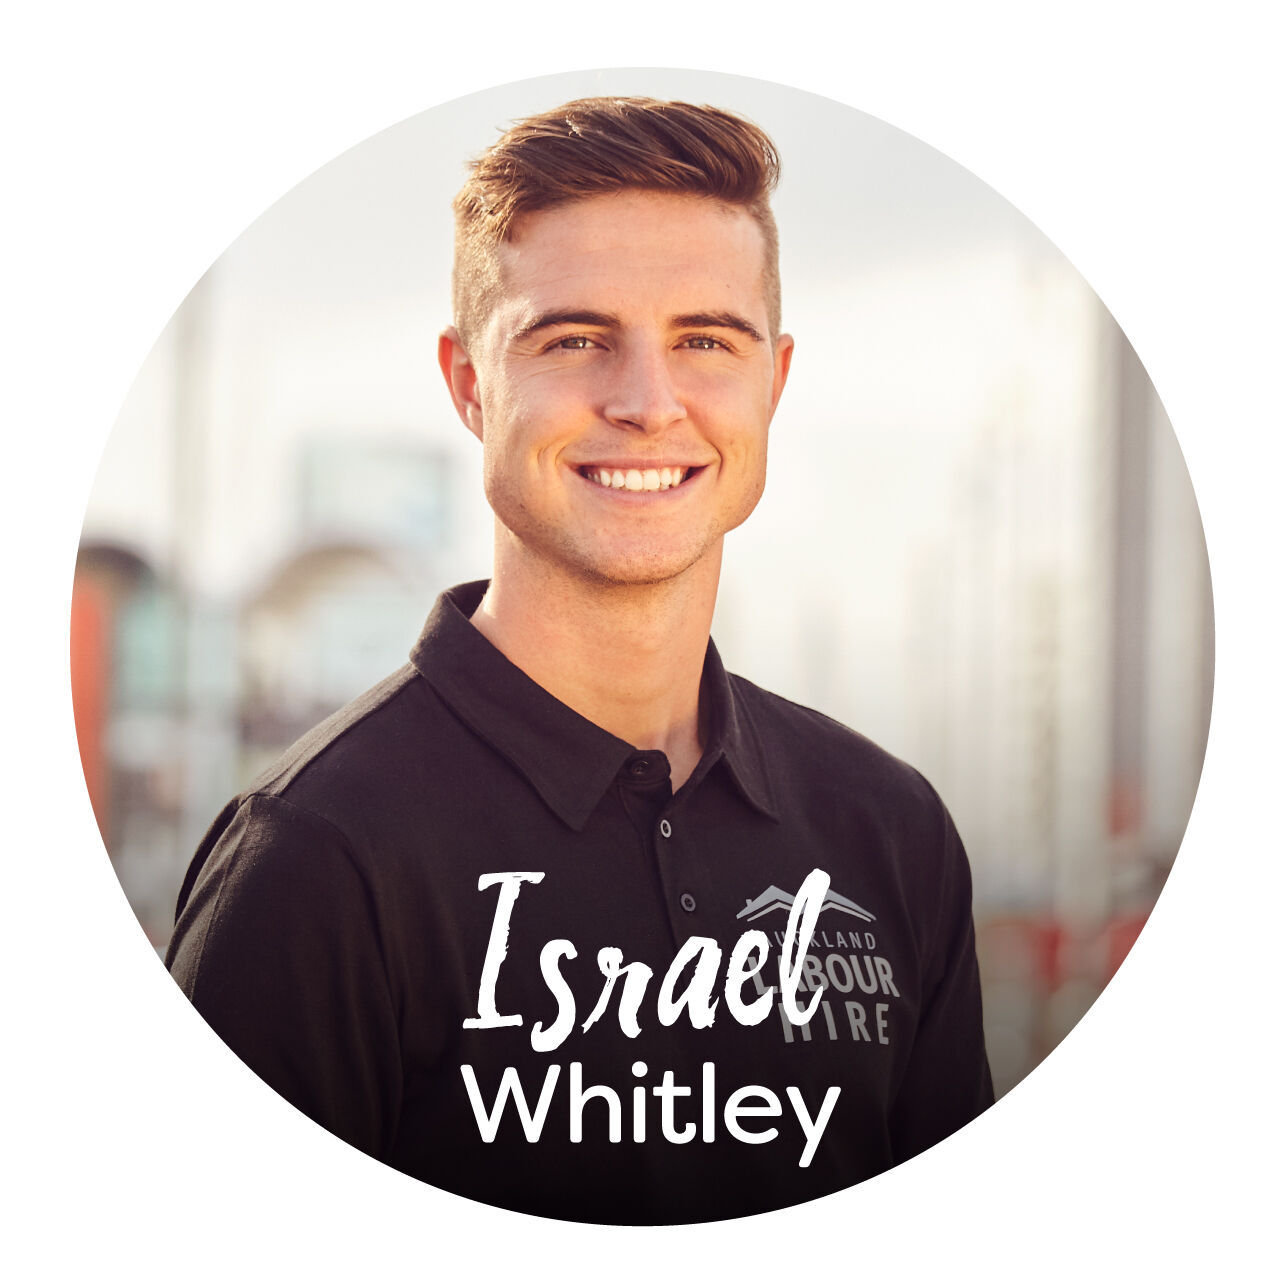 A picture of Israel 'Izzy' Whitley